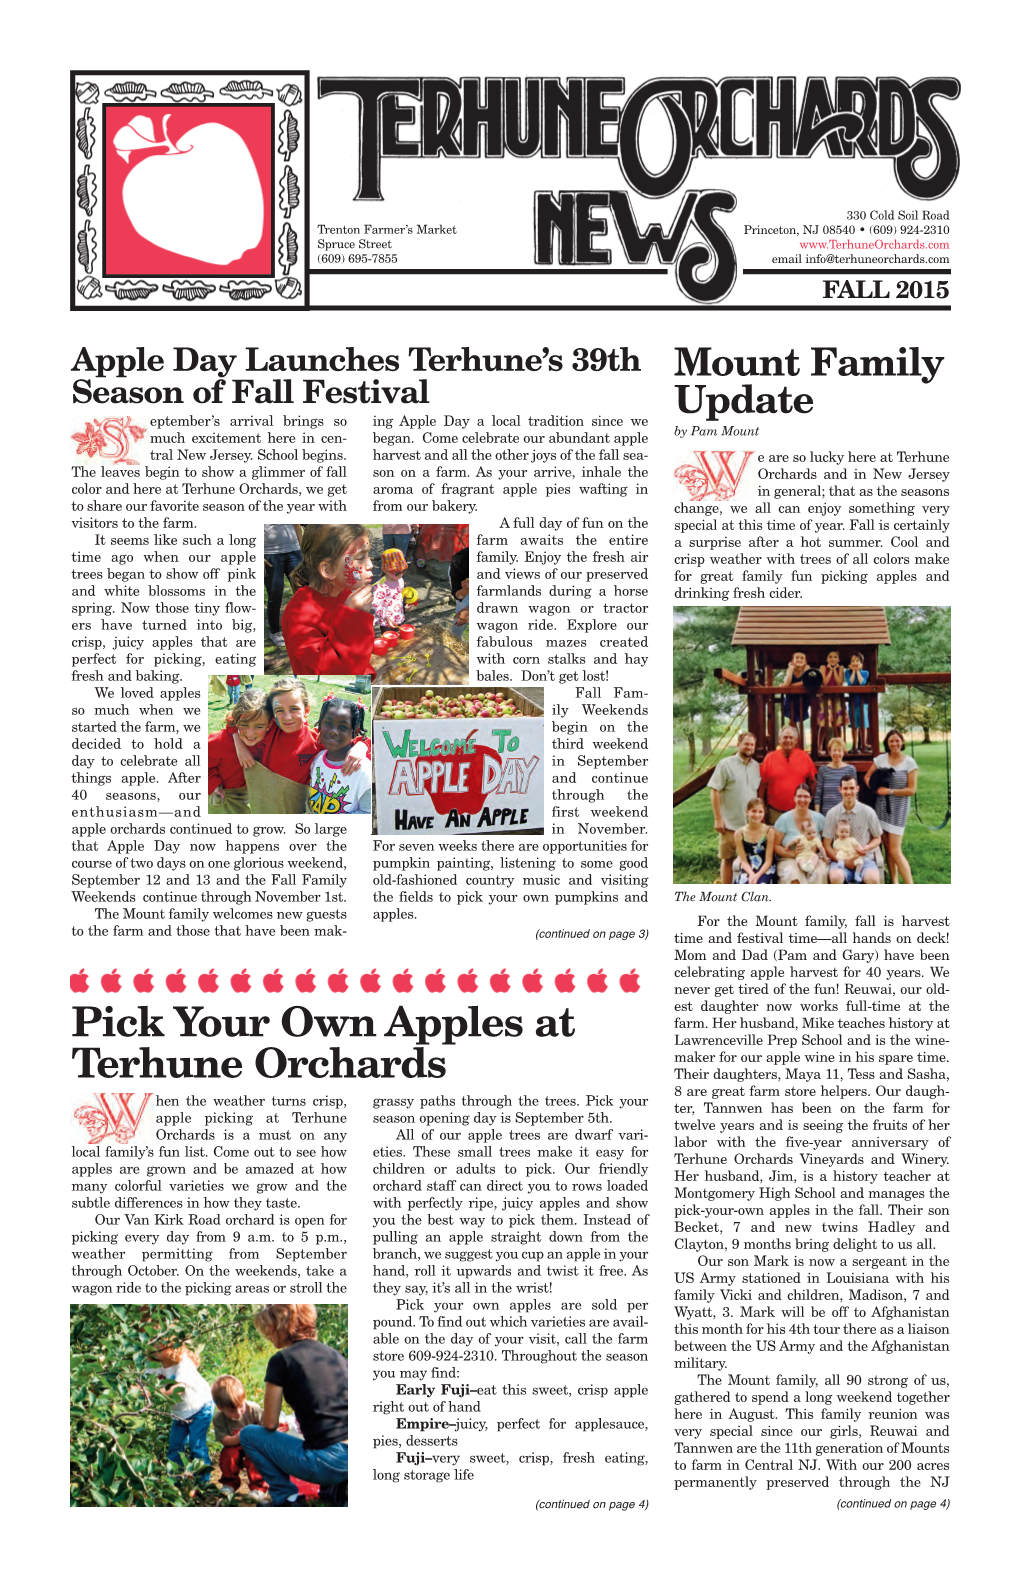 View and Print Terhune Orchards Fall 2015 Newsletter